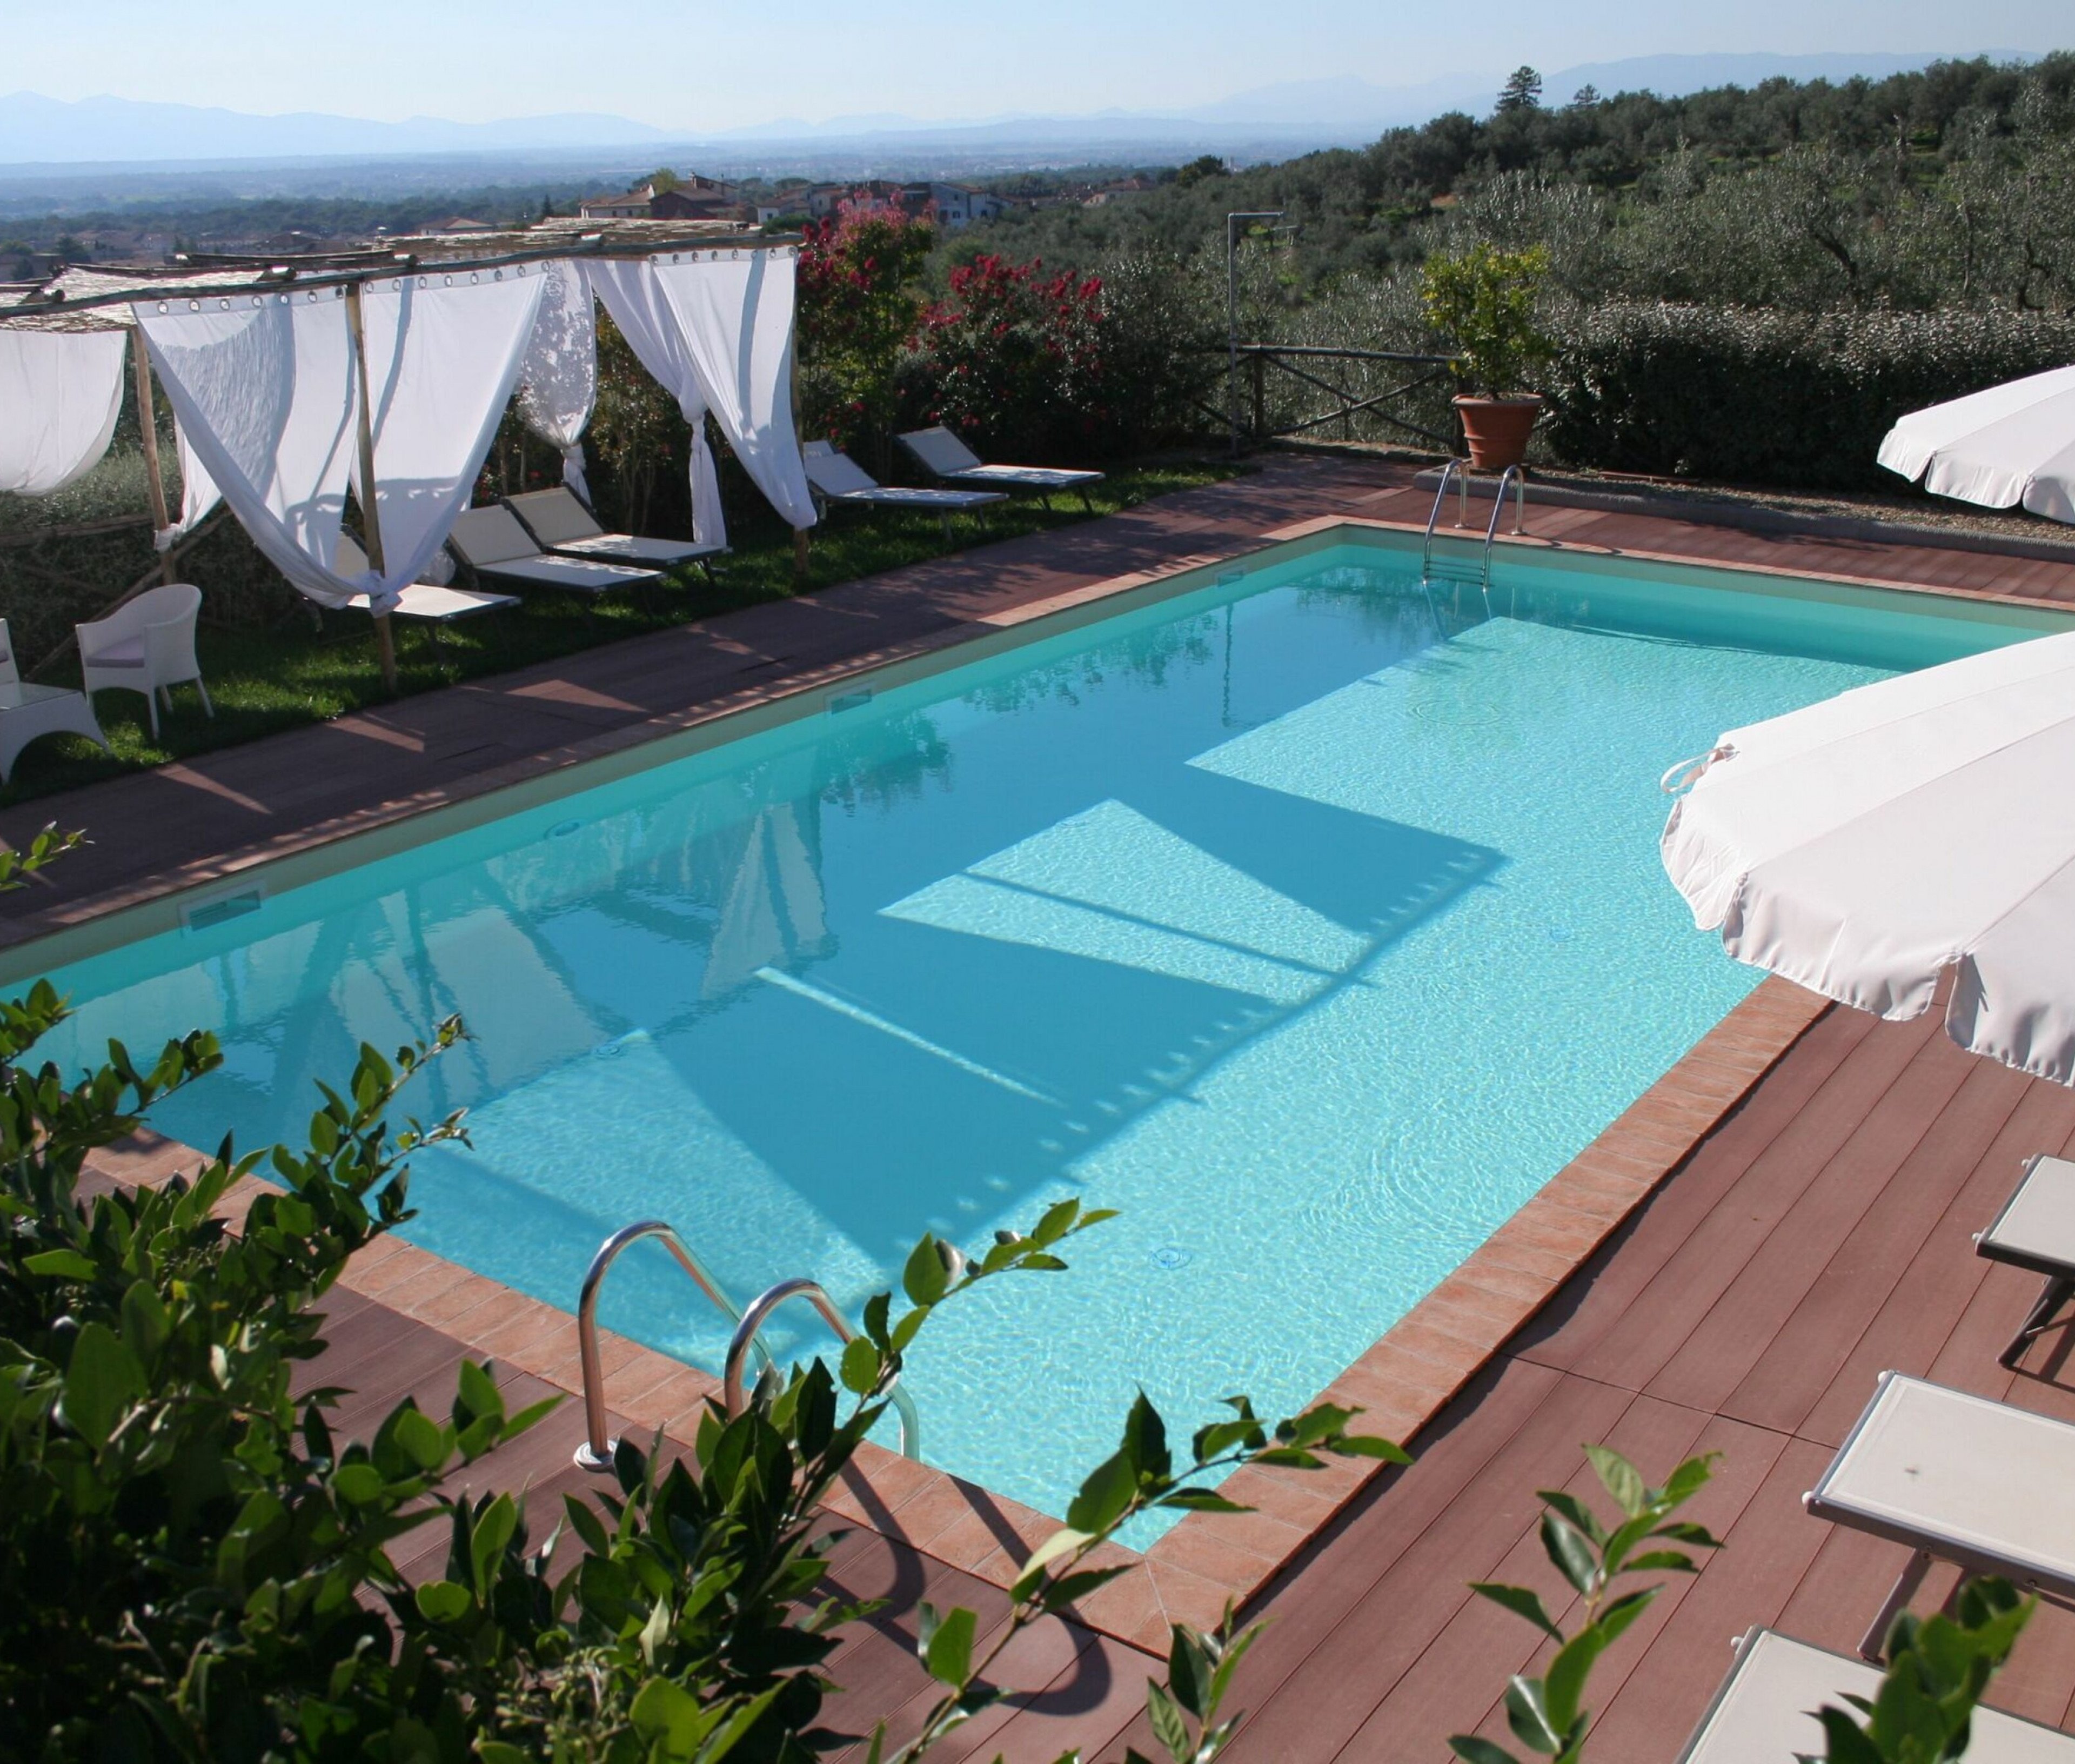 Il Fienile - Pistoia vacation rentals with private pools